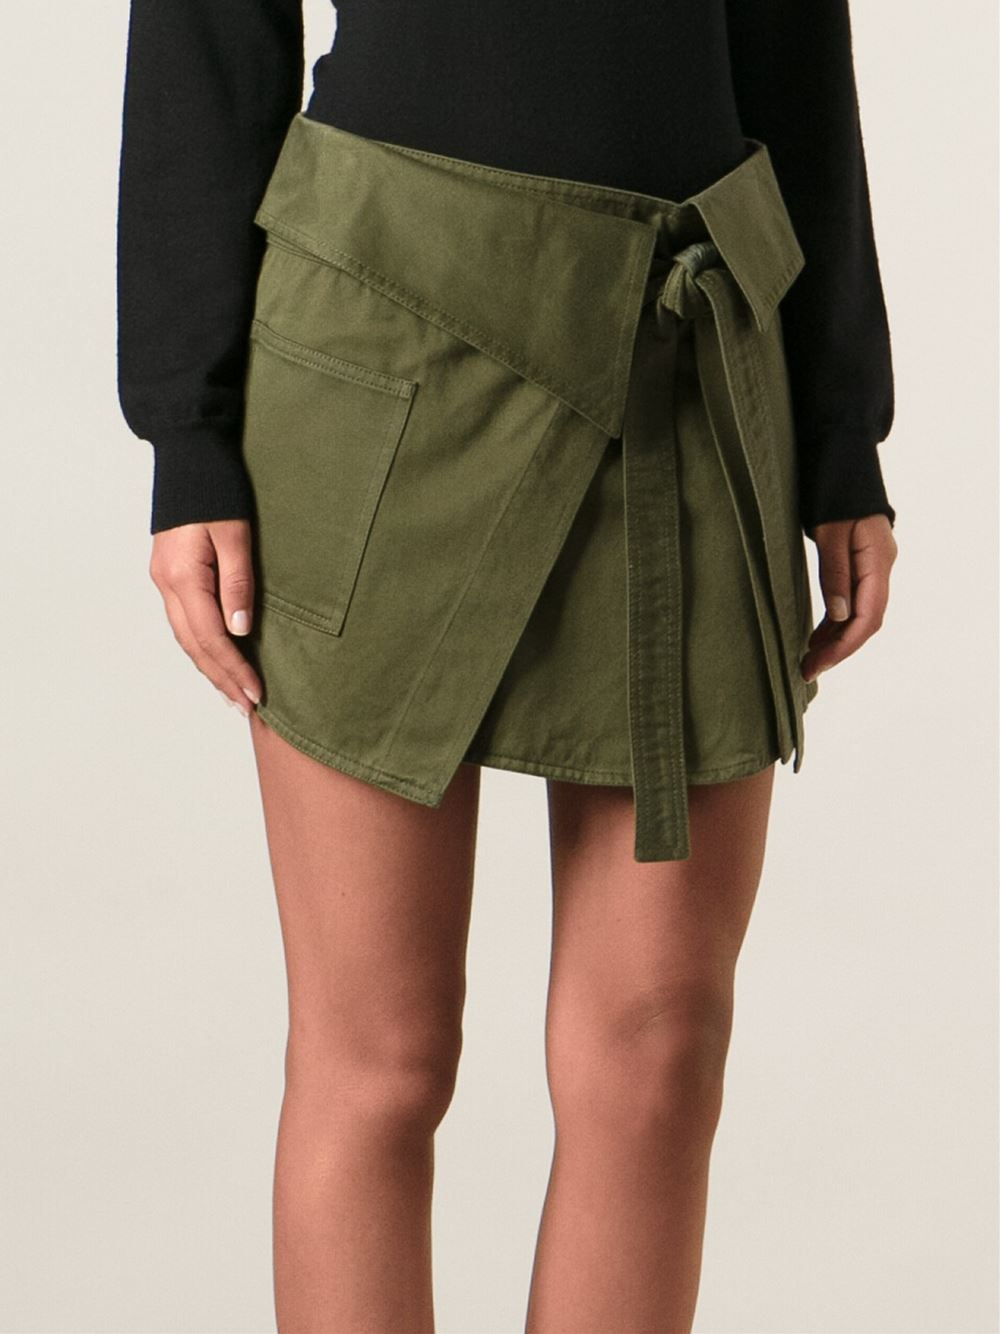 Isabel Marant Wrap Military Skirt in Natural | Lyst